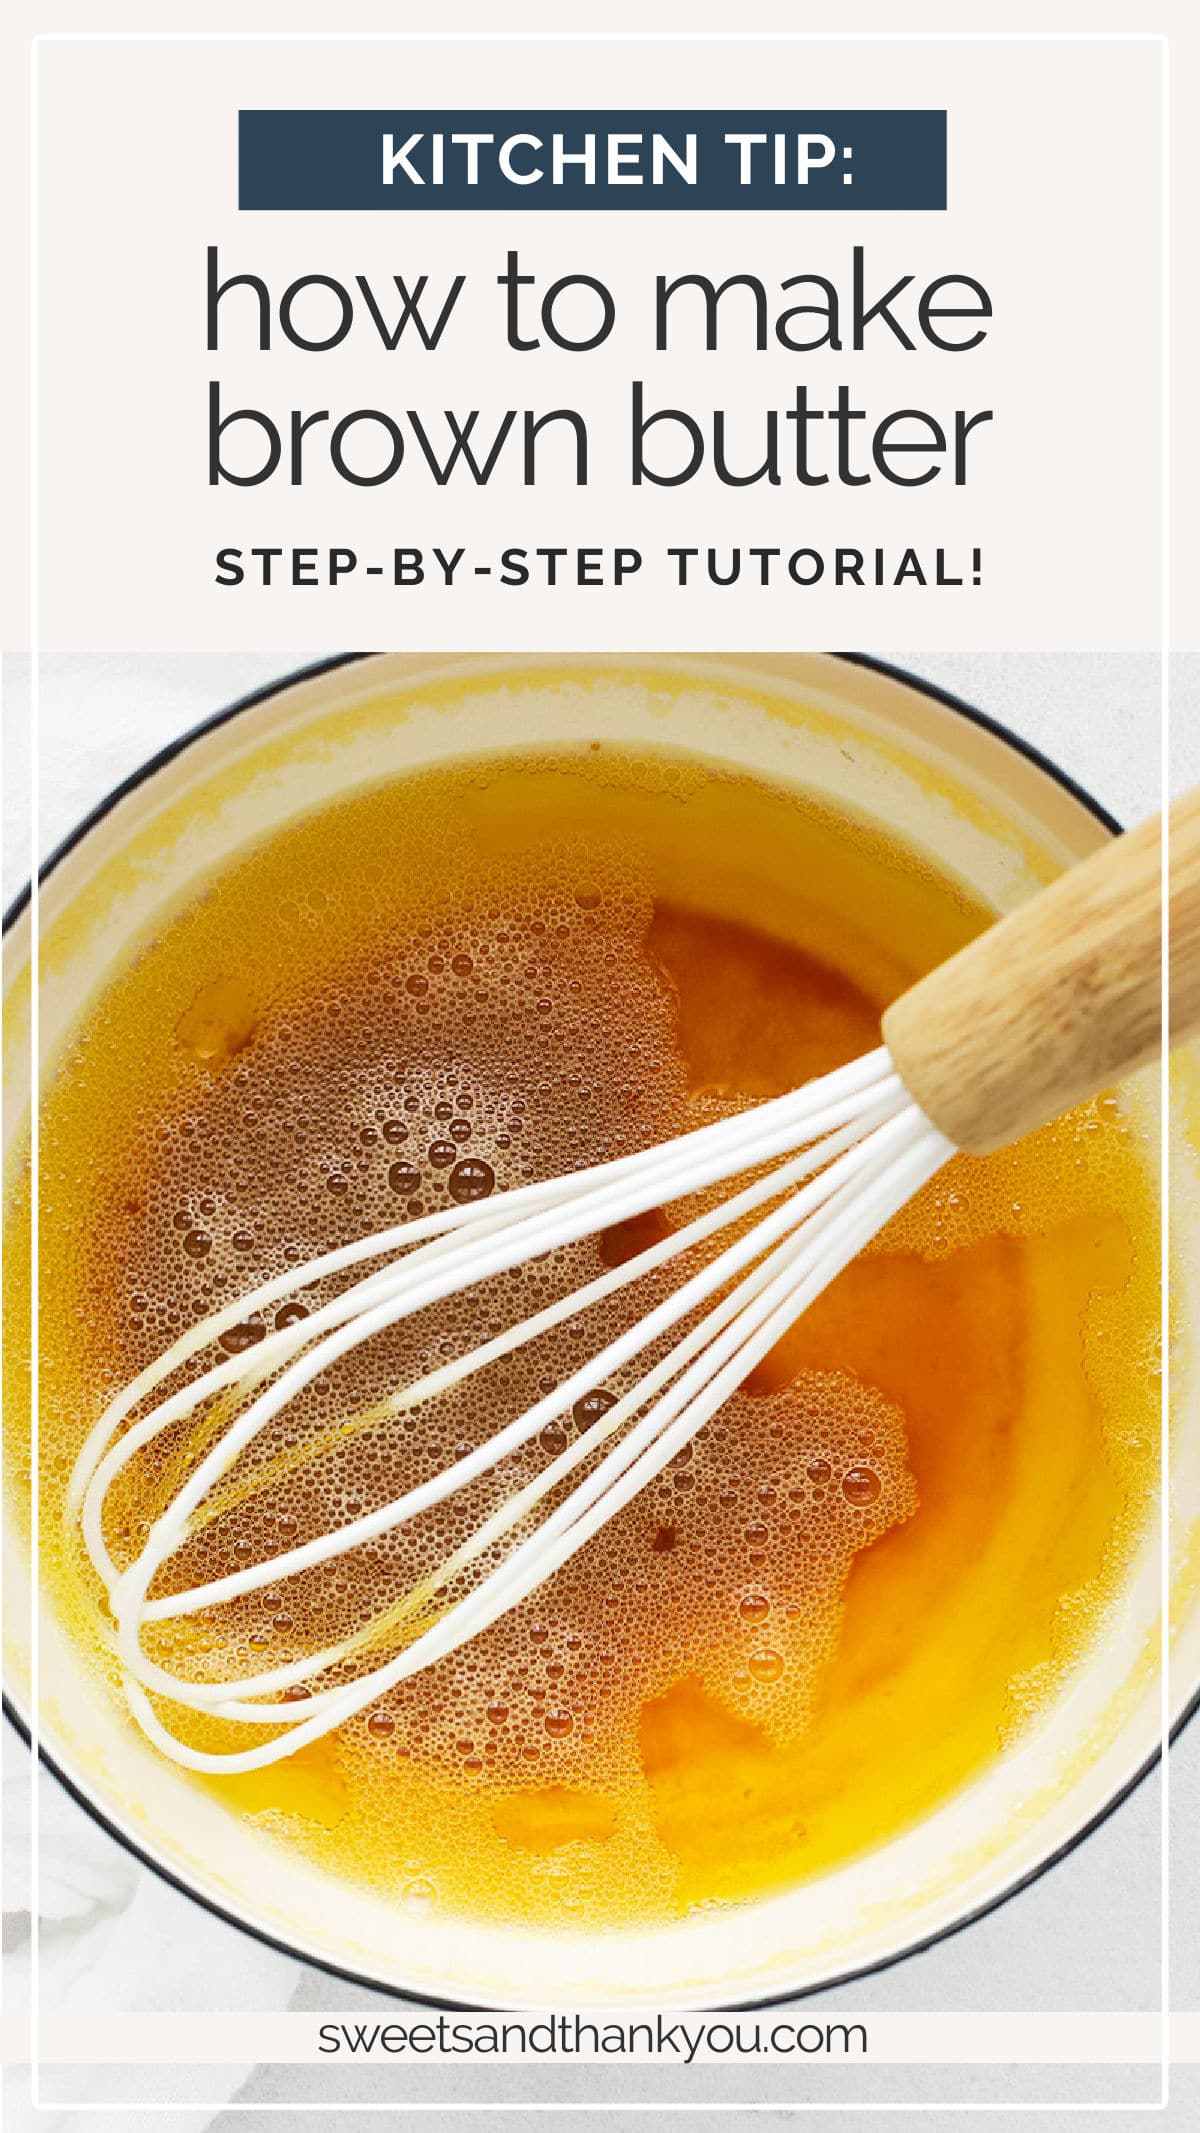 How to Brown Butter - If you've ever wondered how to make brown butter, you're in luck! It's EASY and adds gorgeous flavor to so many recipes. // Brown Butter Tutorial // How to make browned butter // Kitchen Tips // Baking Tips #brownbutter #bakingtip #kitchentip #glutenfree #glutenfreebaking